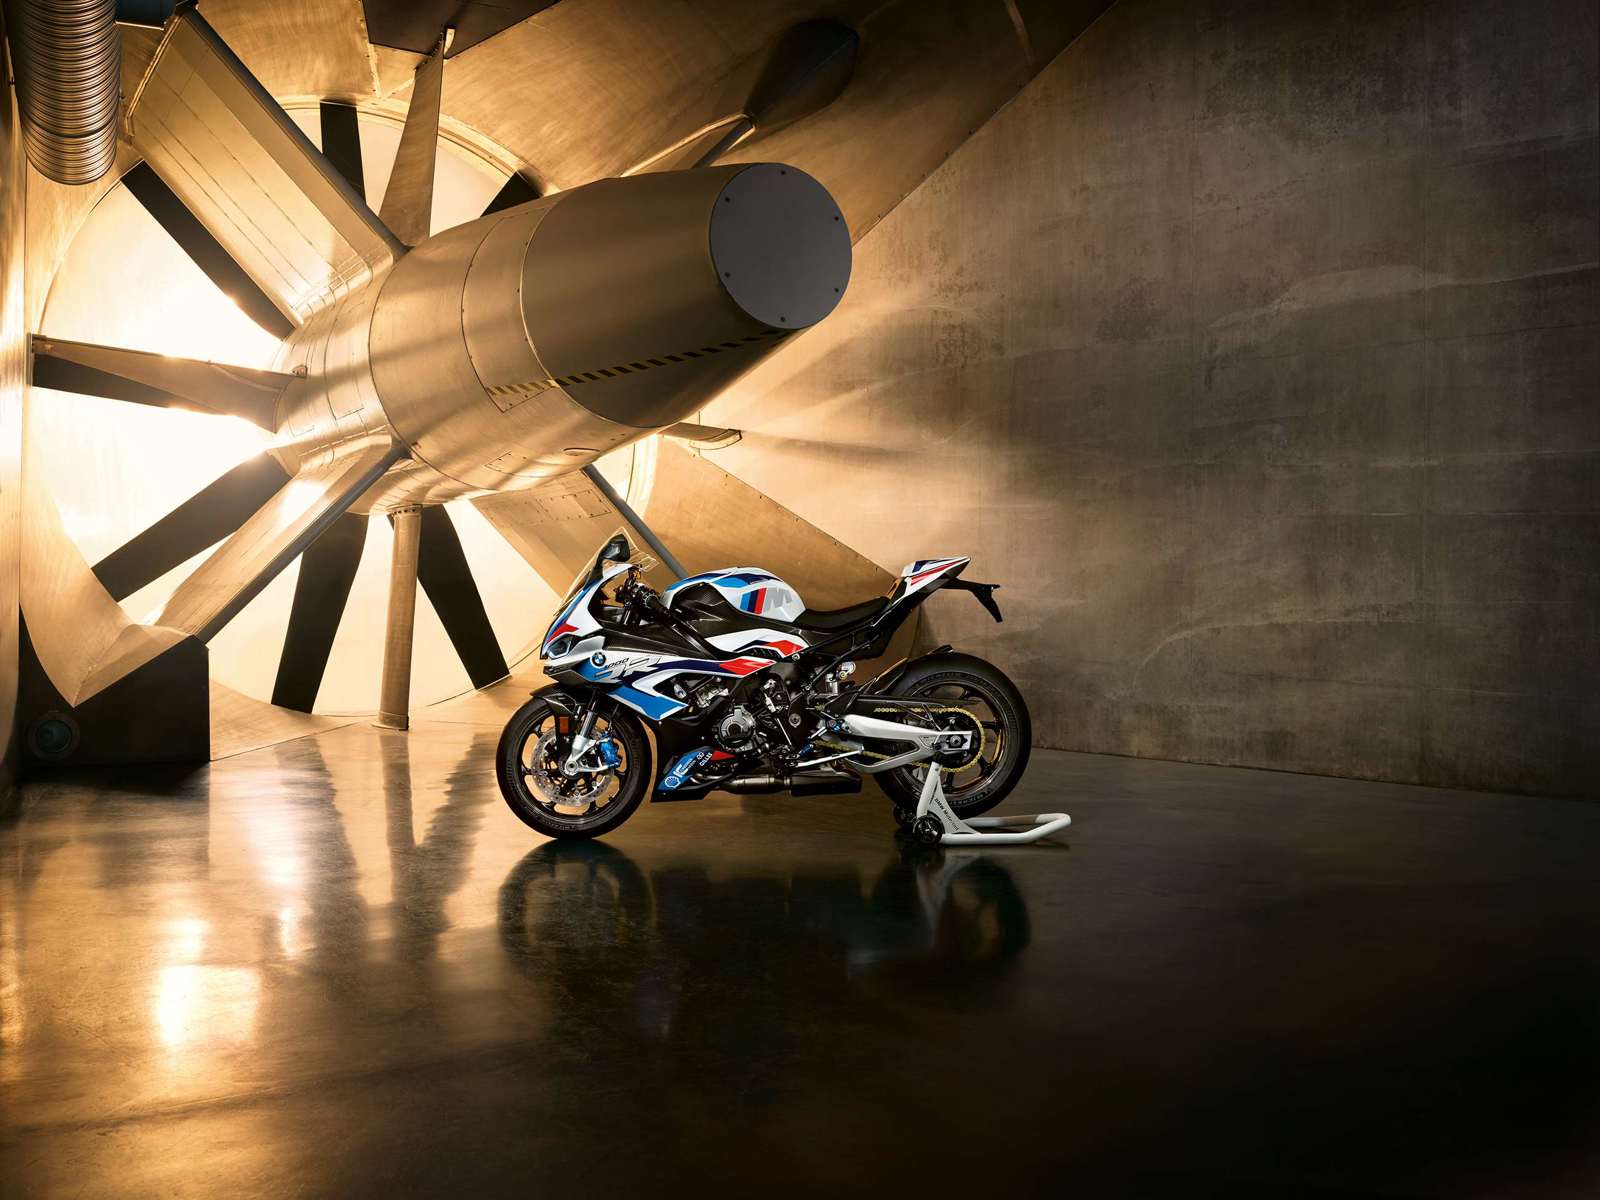 BMW M1000RR – the first bike to get the M treatment | GRR